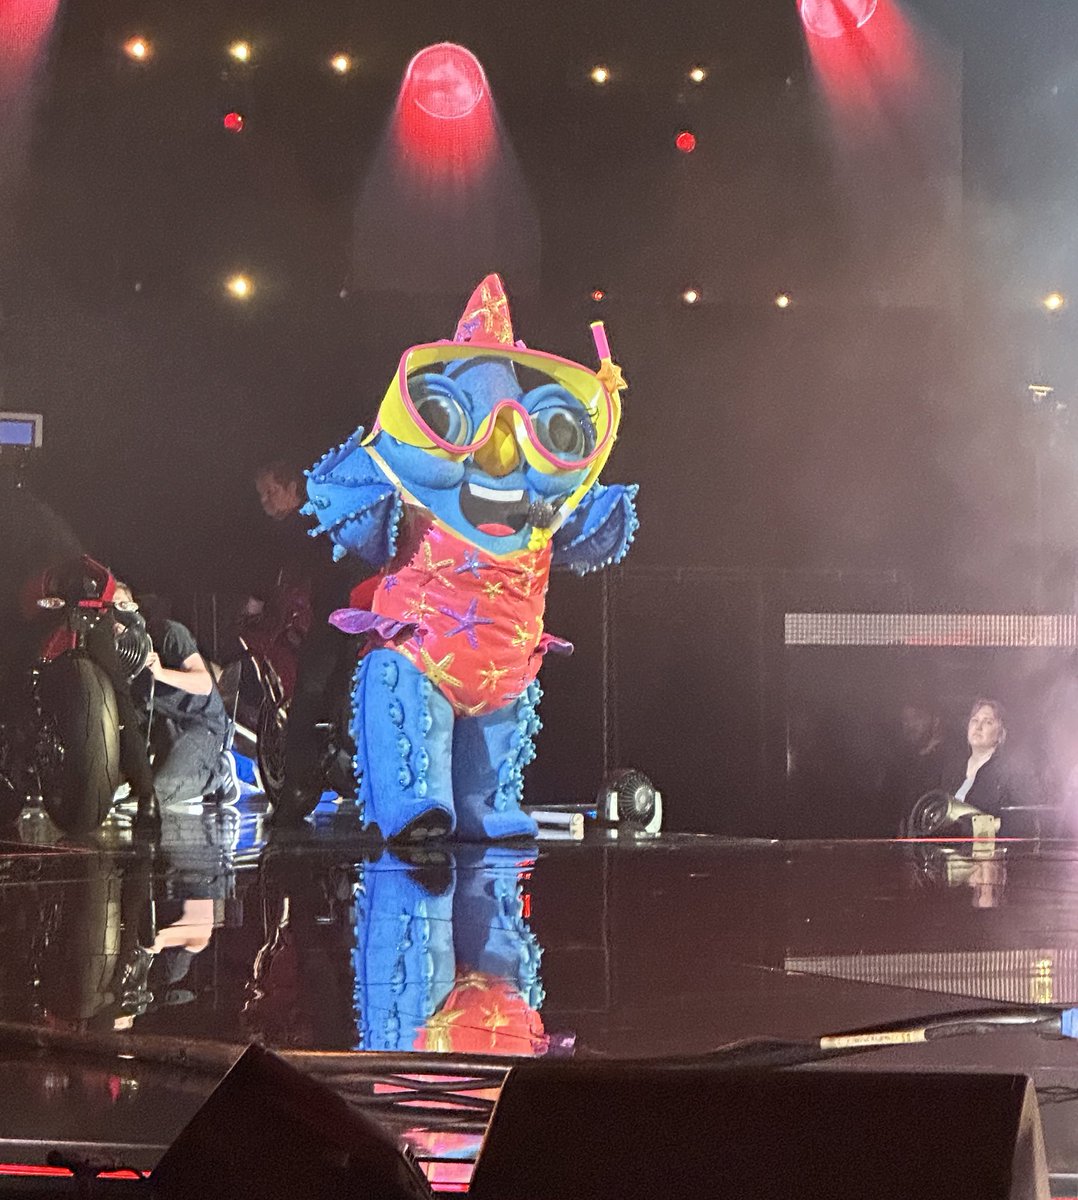 #StarfishMask here reminding everyone to watch #TheMaskedSinger tonight.
Rooting for my fish friend, whoever she is!?